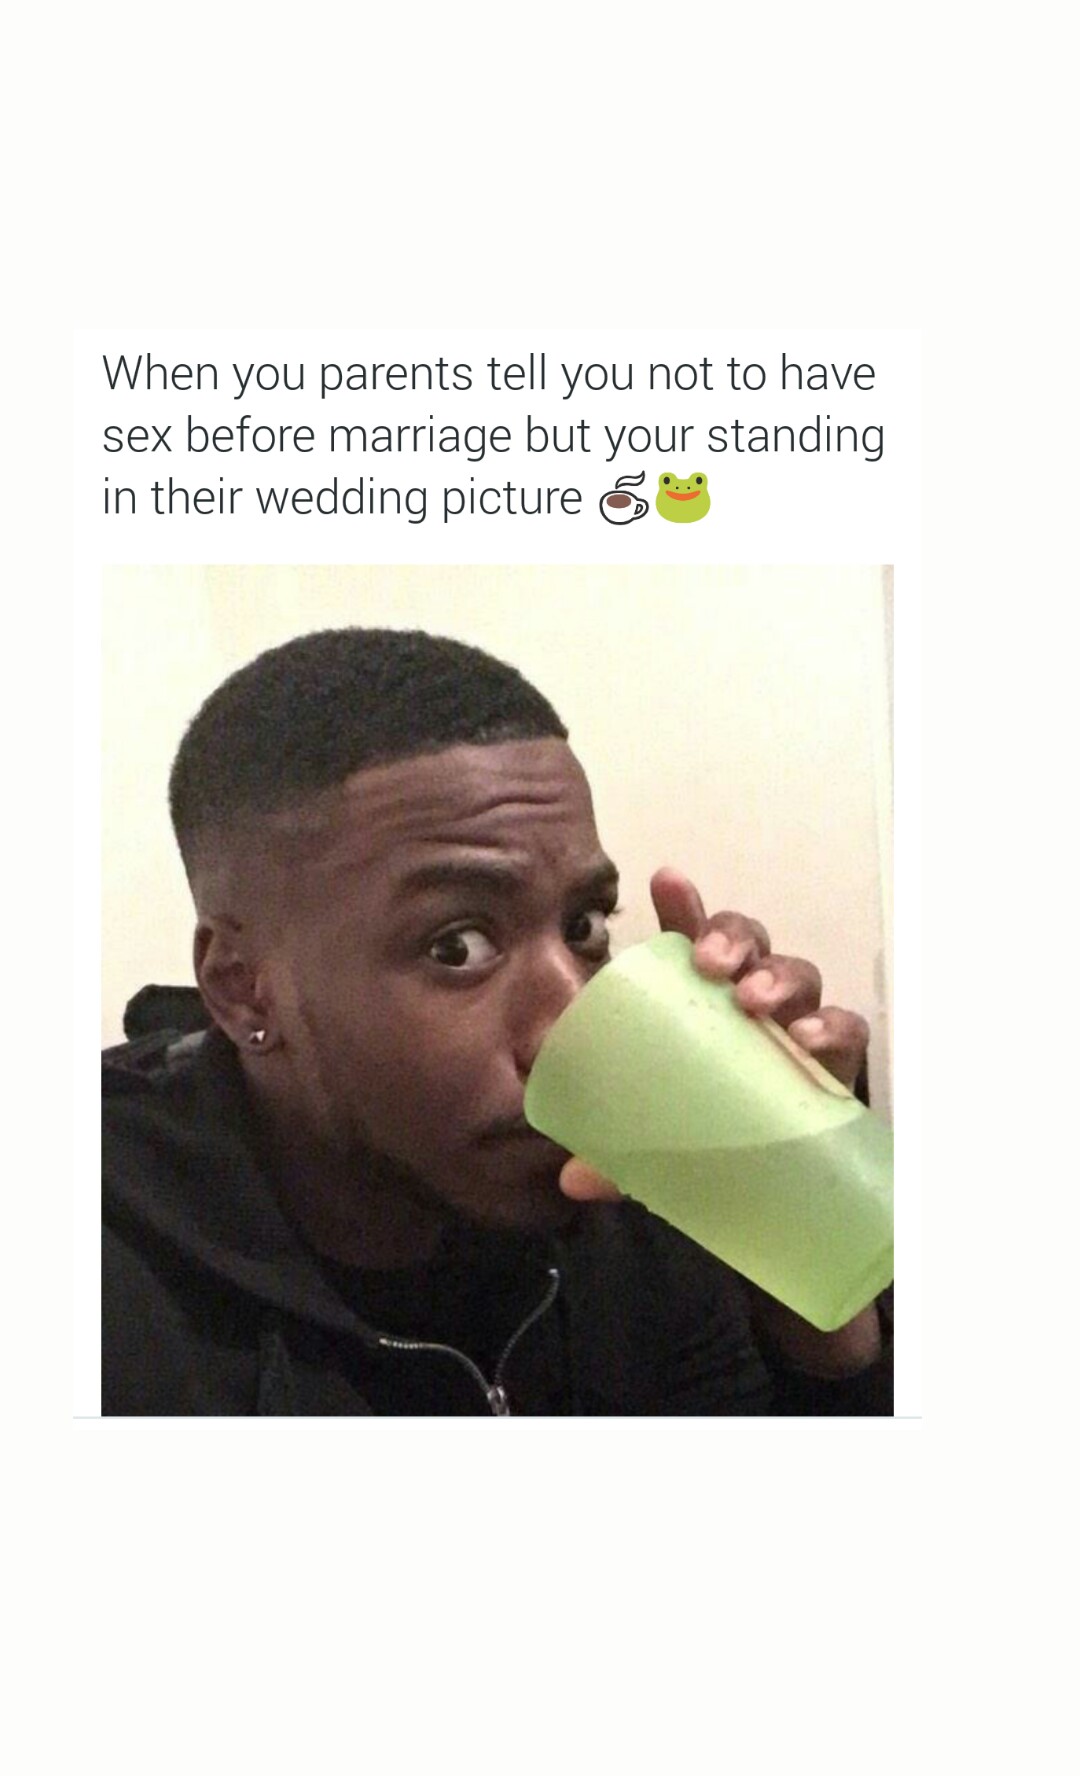 cool deez nuts bruh - When you parents tell you not to have sex before marriage but your standing in their wedding picture 6